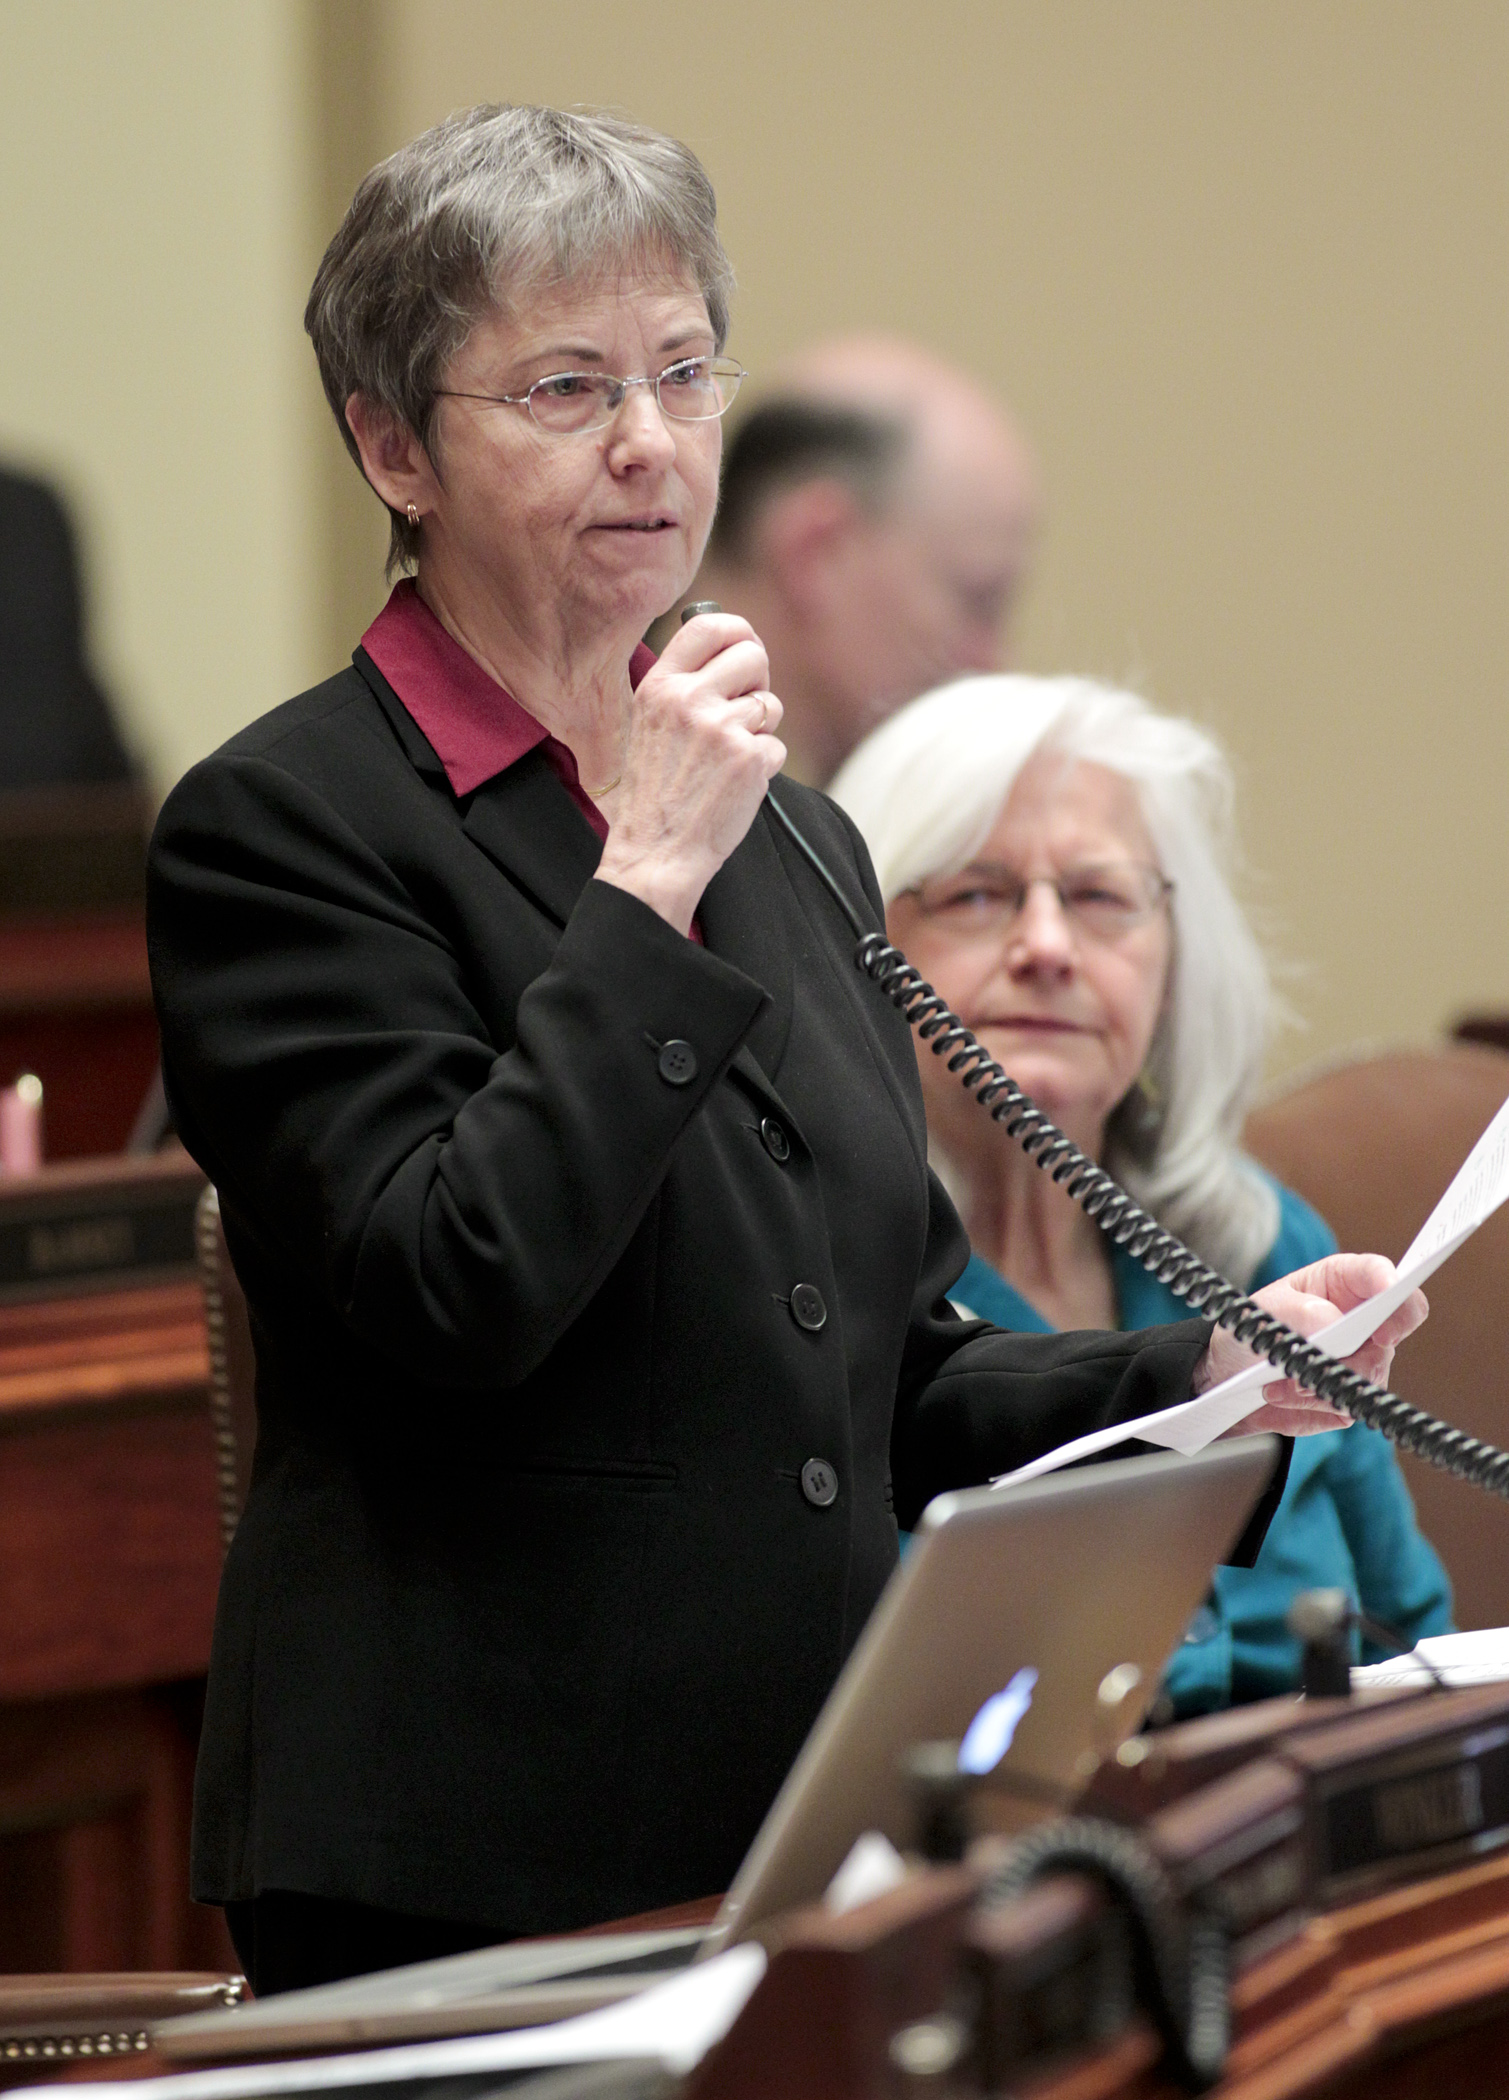 Rep. Carolyn Laine explains provisions of her bill, HF2166, which would extend a study of the use of electronic rosters in polling places to include the 2014 general election in select jurisdictions. Photo by Paul Battaglia